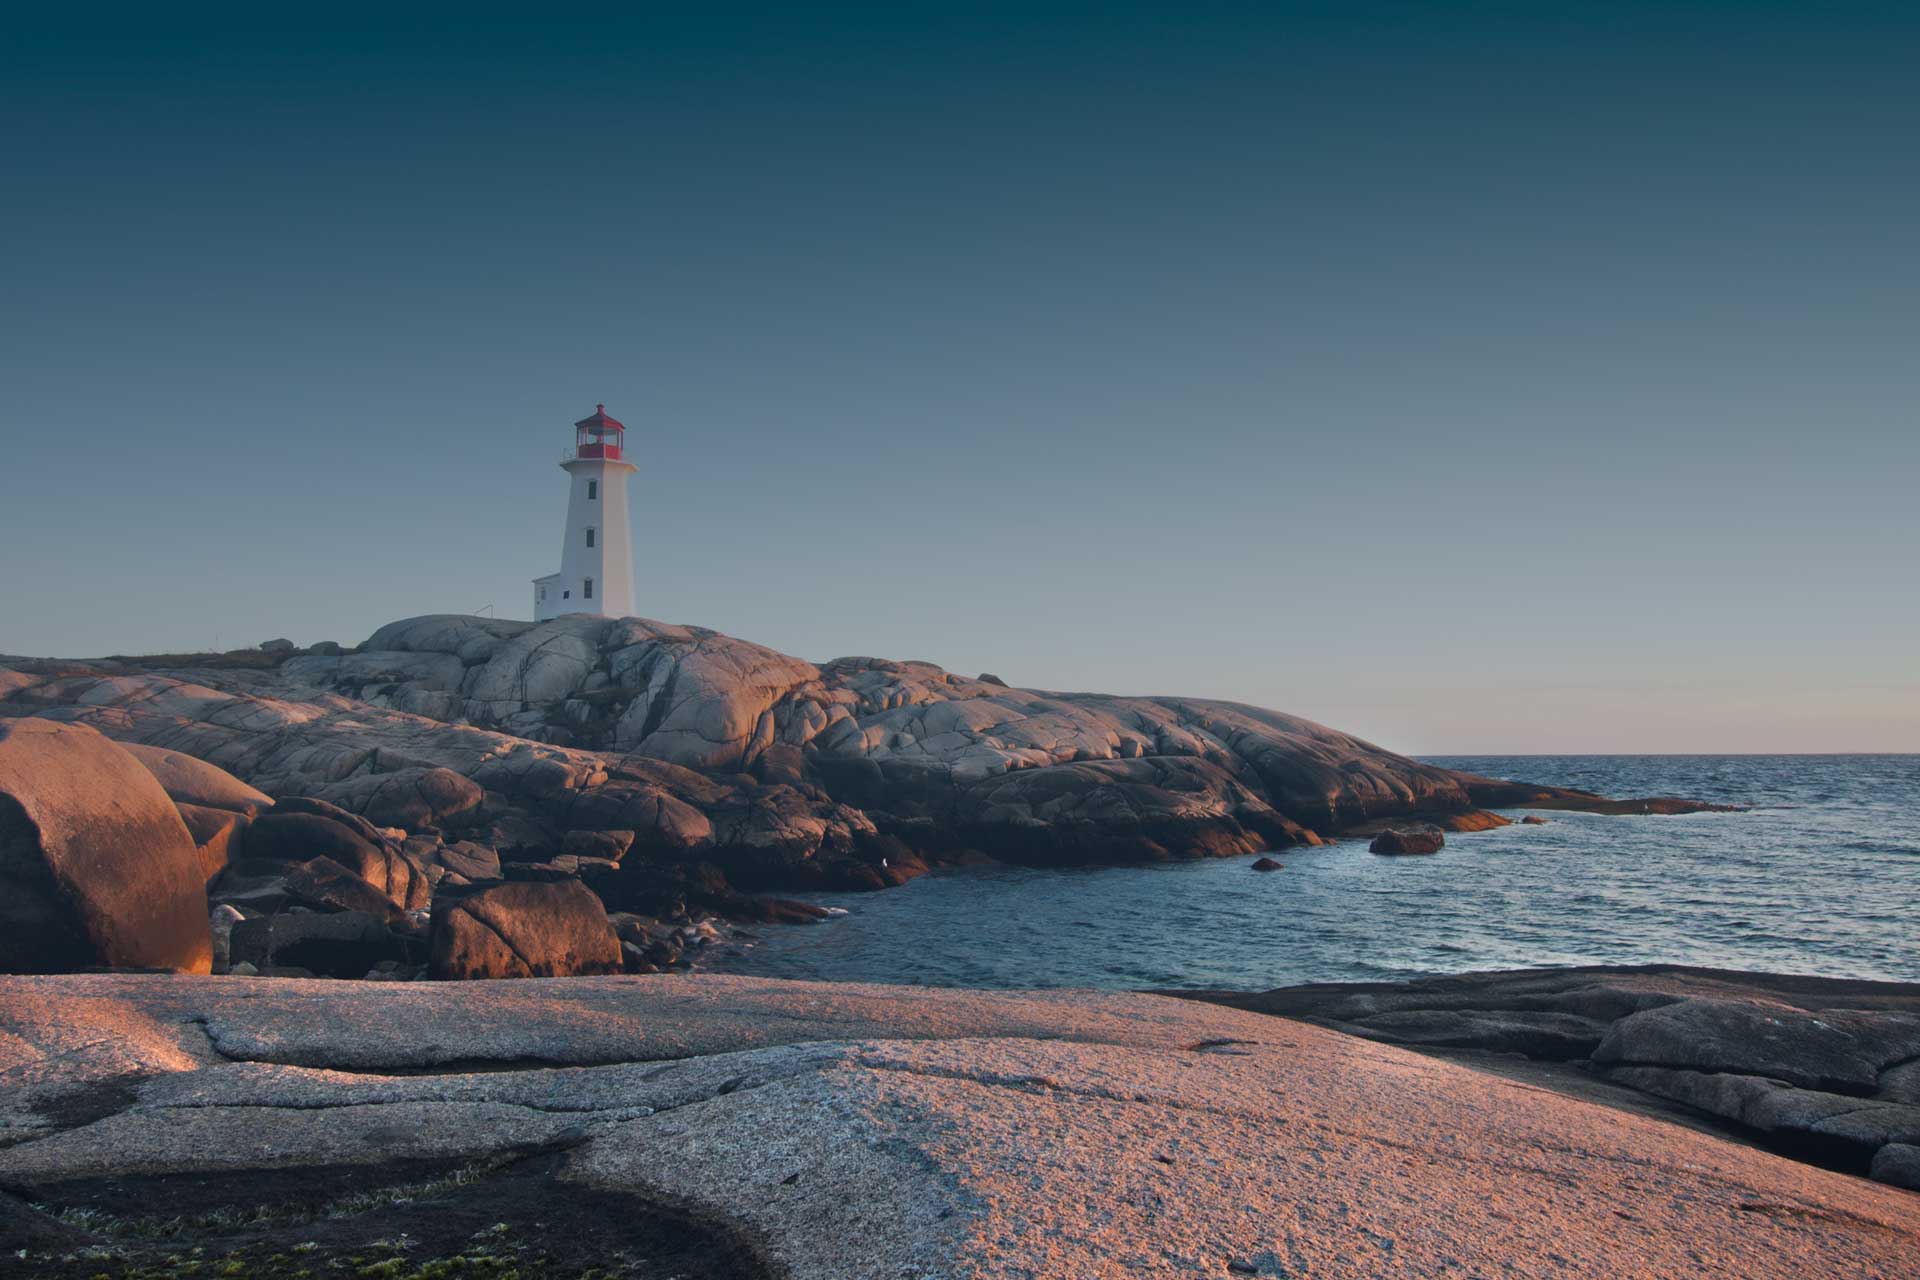 Photograph at sunset of Peggy's Cove lighthouse